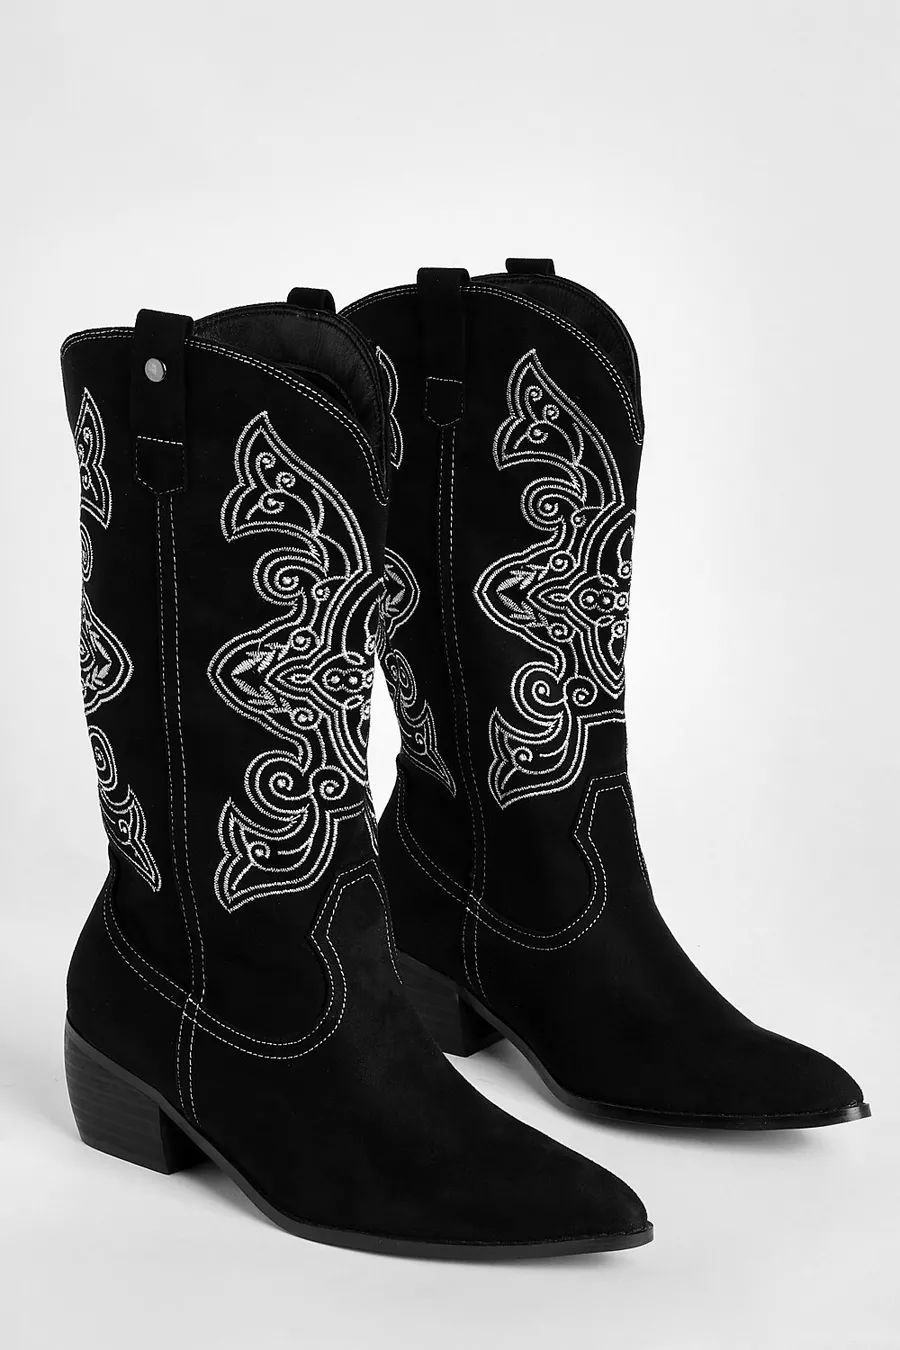 Wide Fit Contrast Embroidered Casual Cowboy Western Boots | Boohoo.com (NL)